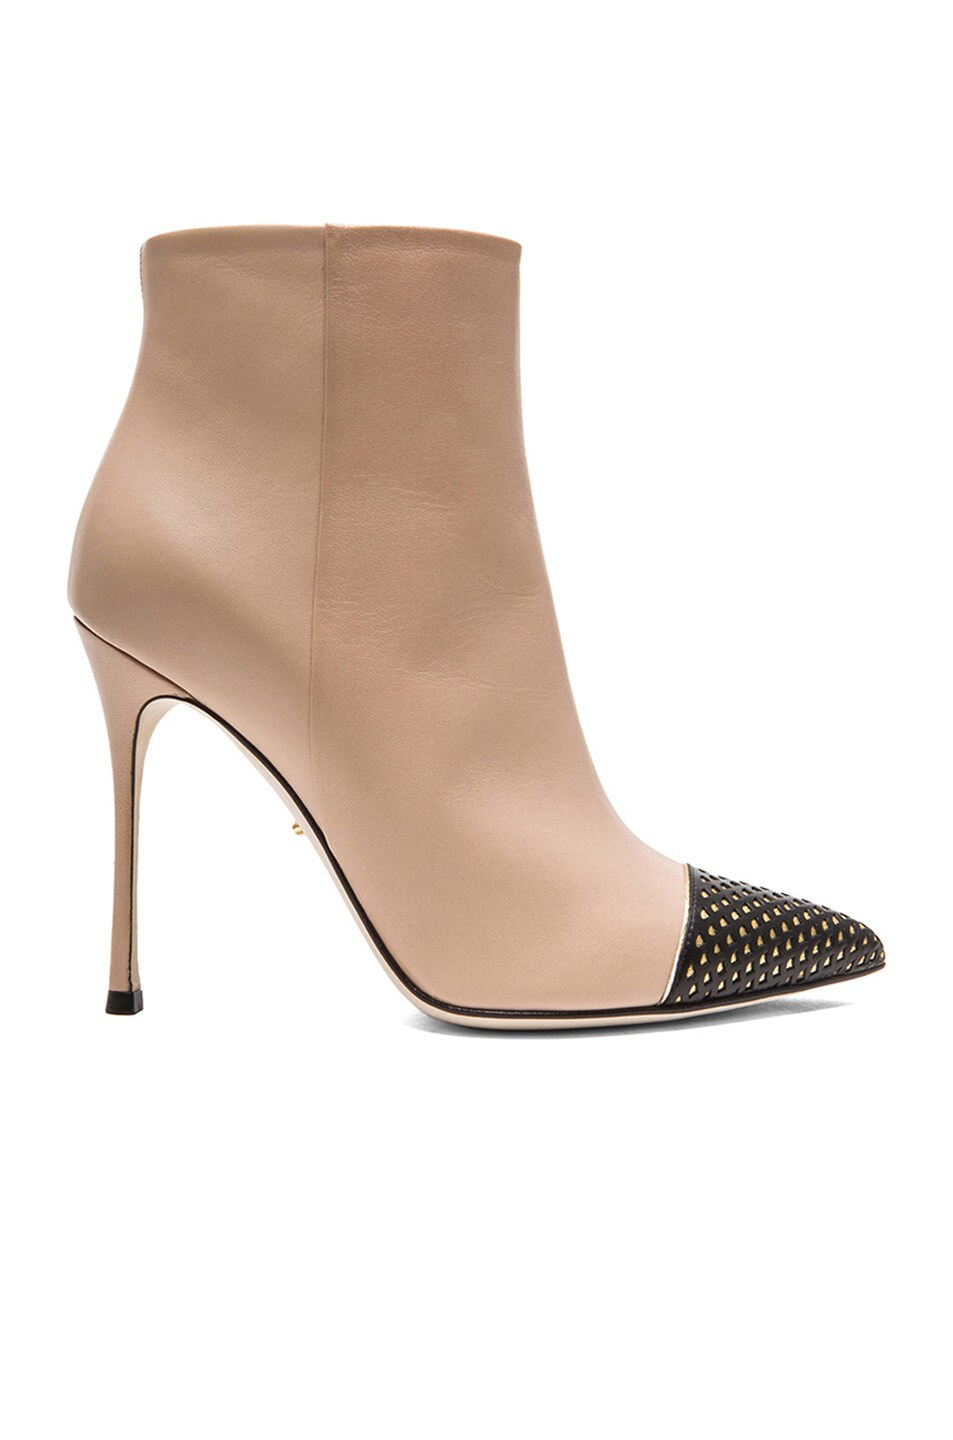 Image 1 of Sergio Rossi Siren Leather Booties in New Nude